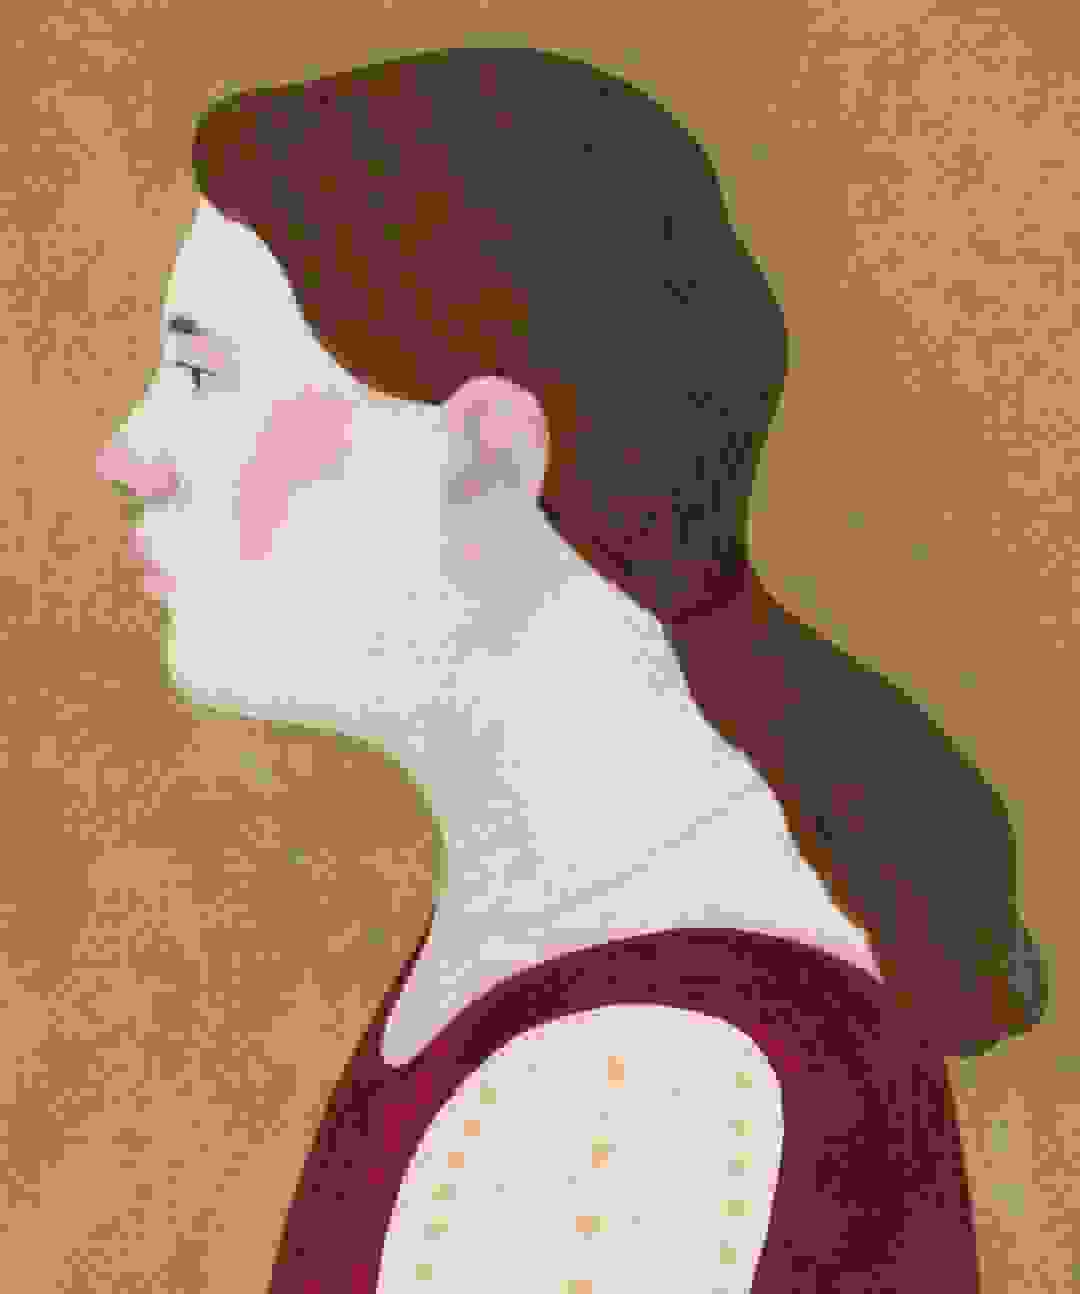 a profile portrait of a young girl in a red top with pearls and brown hair pulled back into a ponytail. 